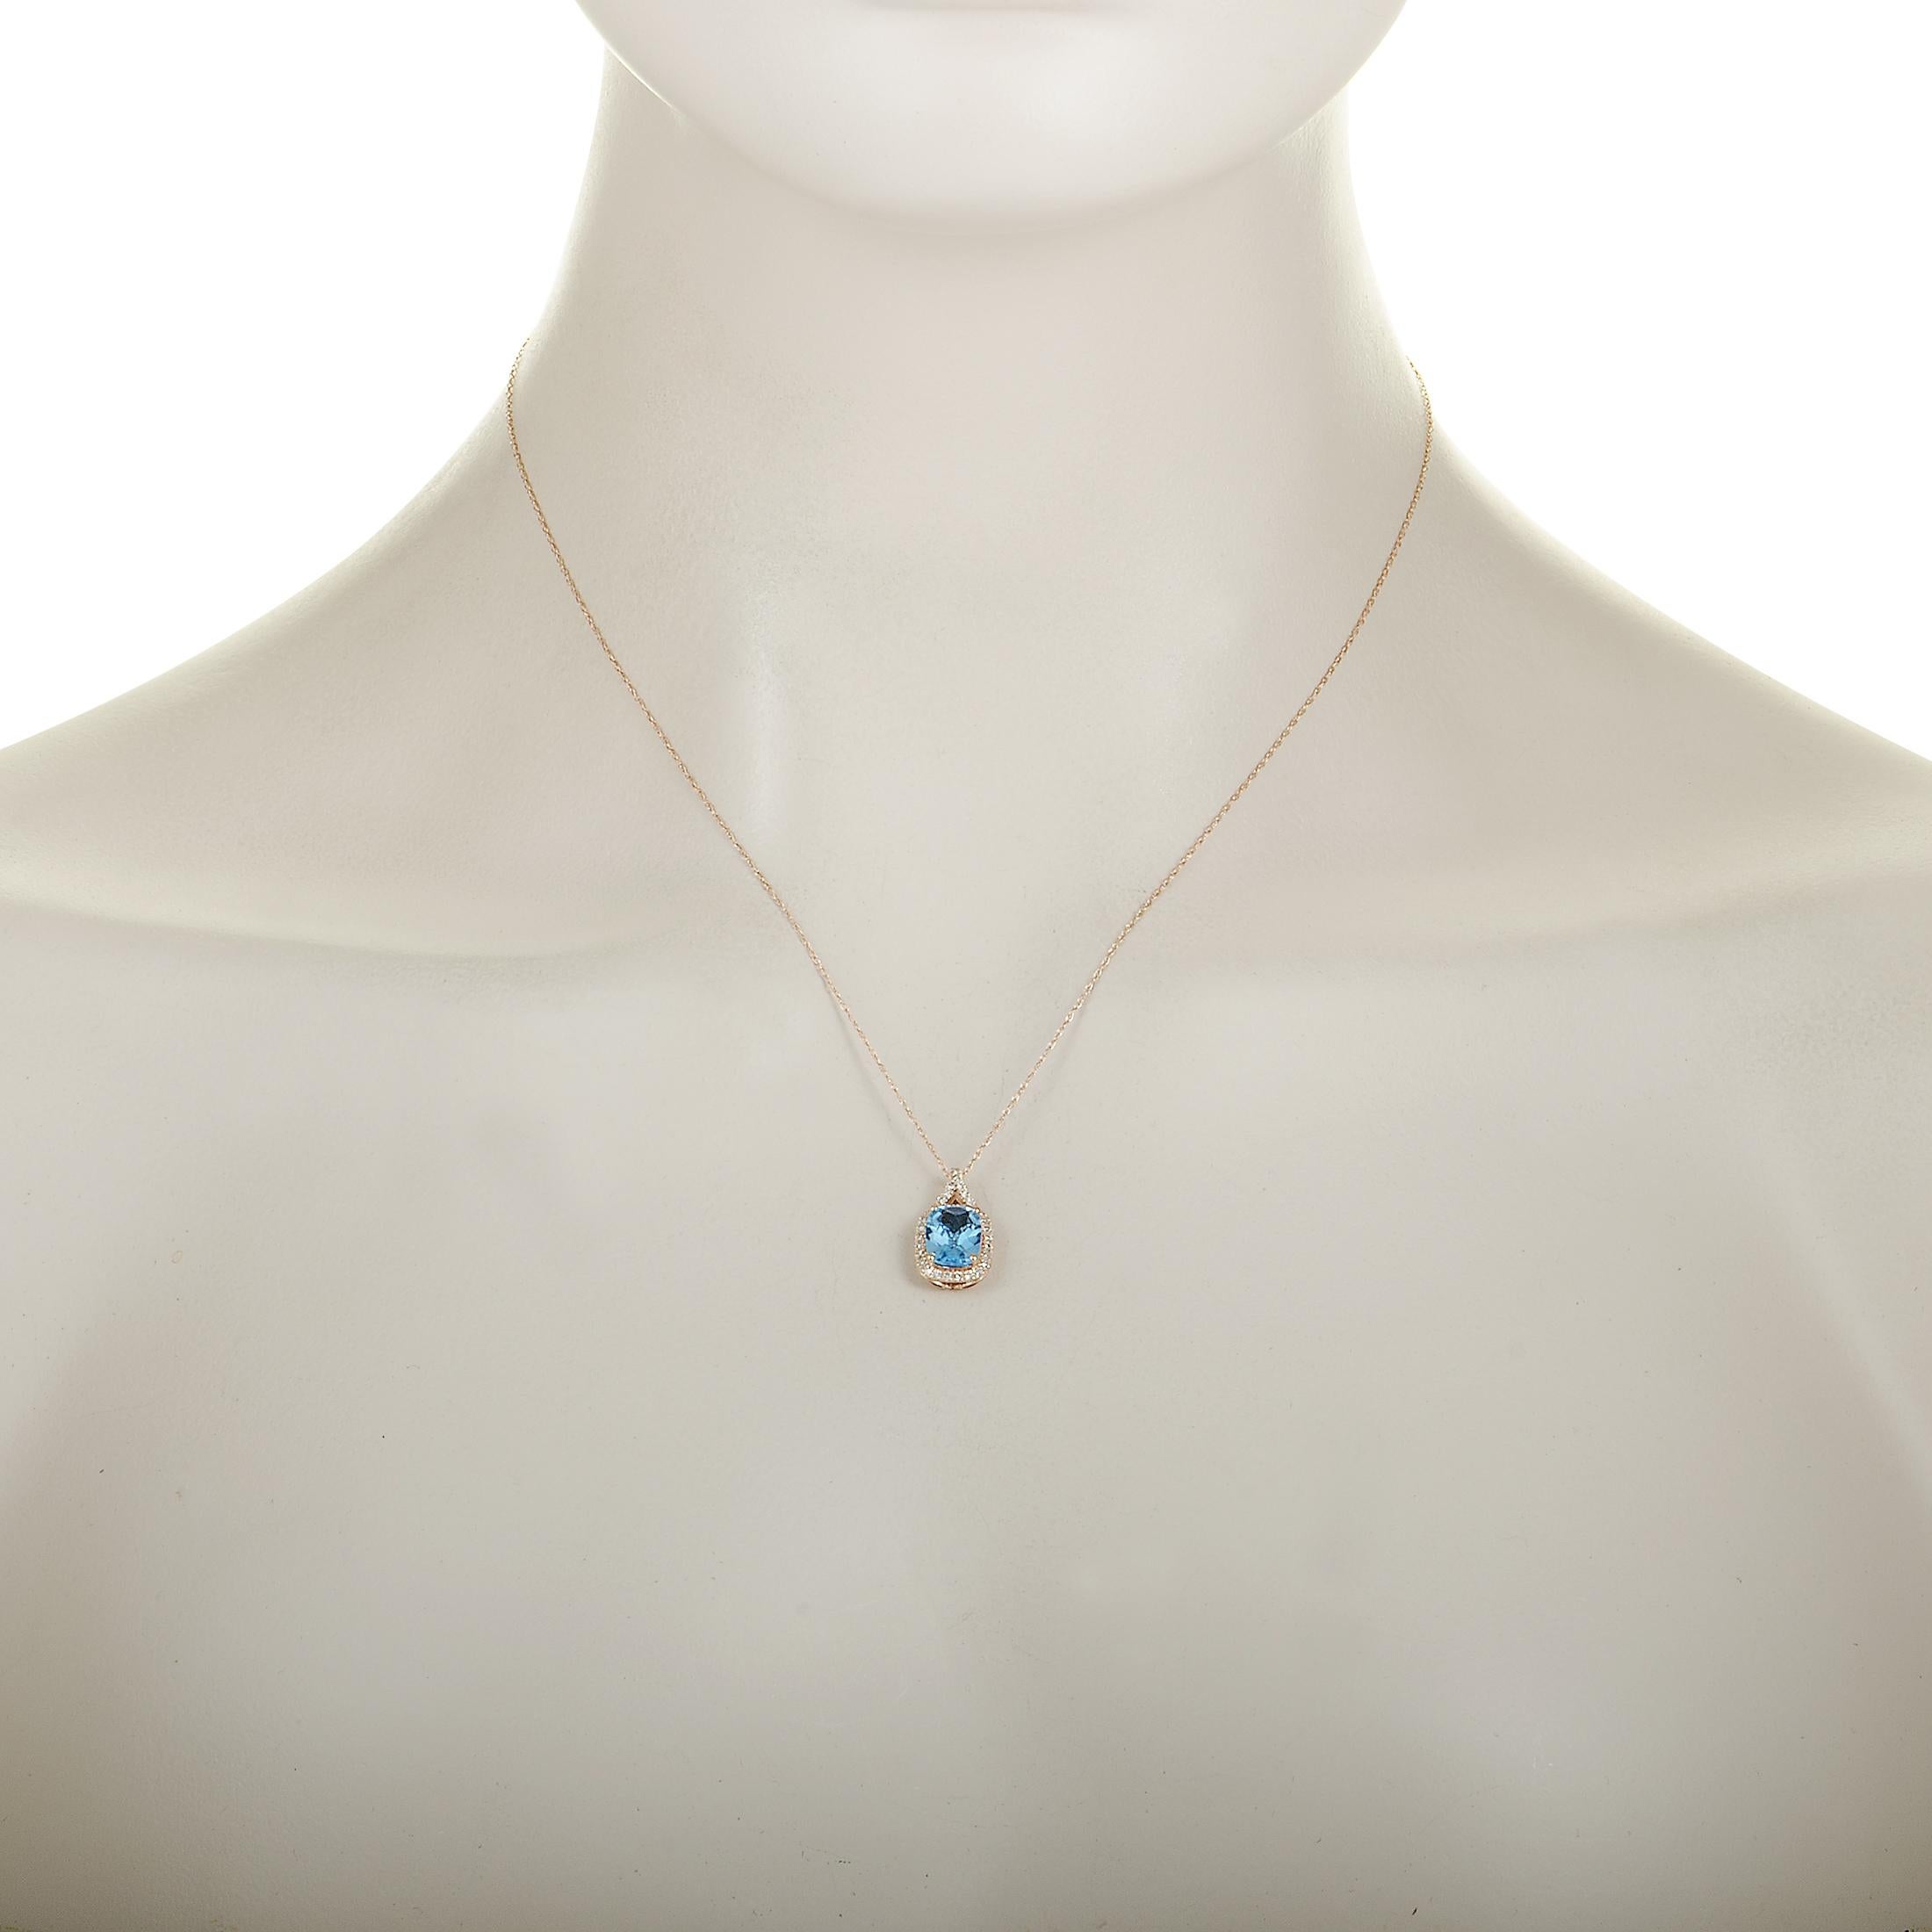 The necklace is made out of 14K rose gold, diamonds, with stone weight totaling 0.13 carat, and a topaz.
 
 Offered in brand new condition, the pendant measures 0.62” by 0.37” with a chain length of 17”, weighing a total of 2.2 grams with a spring